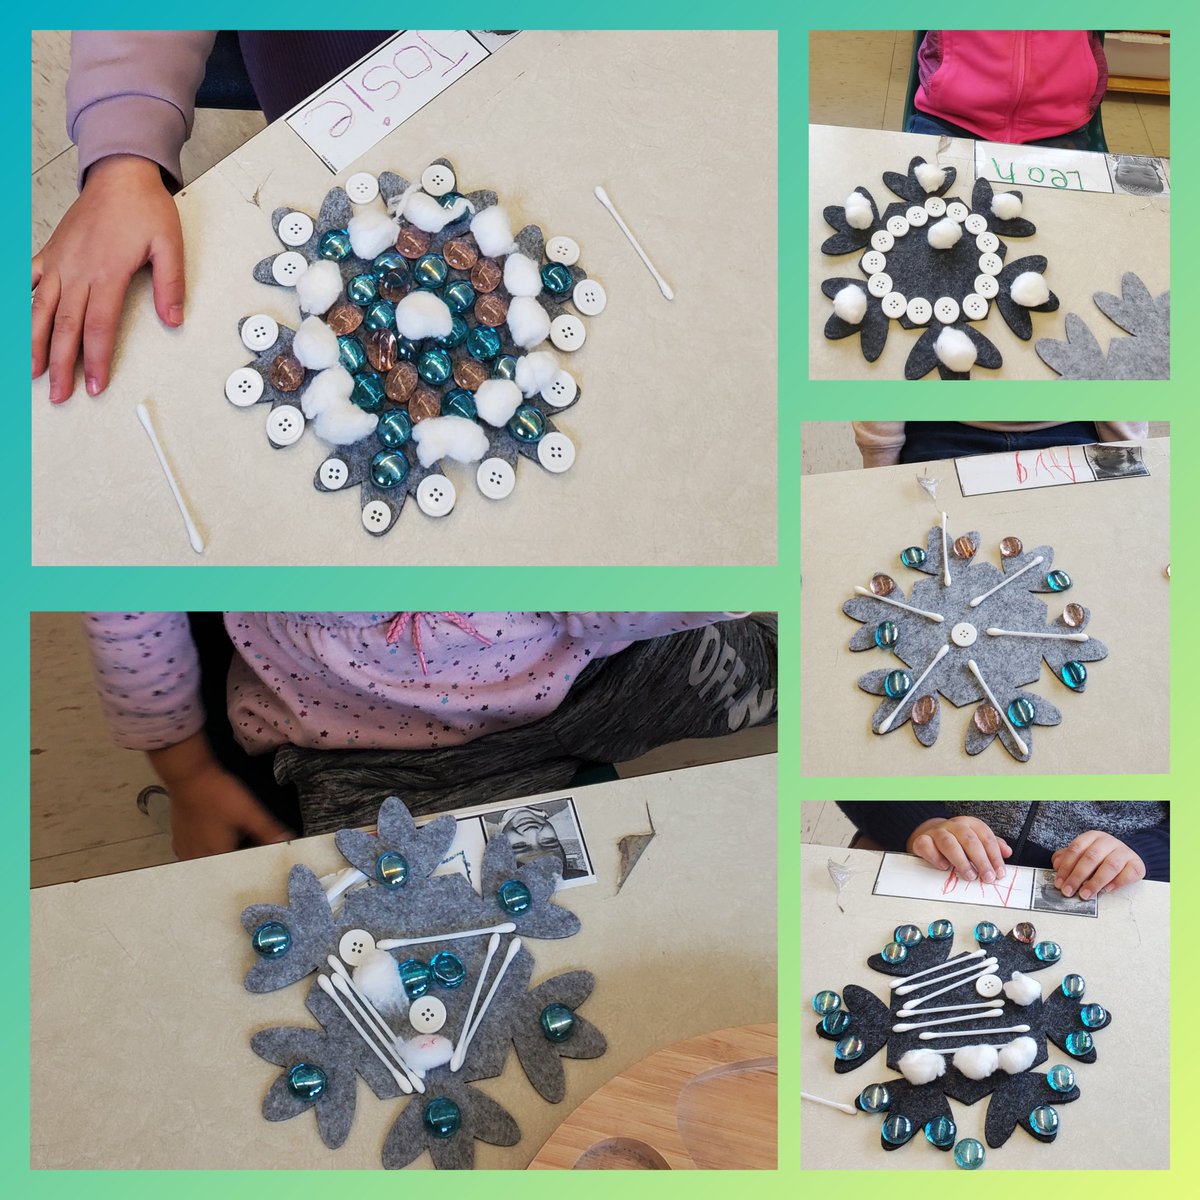 As learners loved playing with the snow again today, they wanted to bring the snowflakes back into the classroom  ❄❄❄❄❄❄❄❄
So a simple question was asked..how might we create a snowflake with loose parts?
#creativityatitsbest
#snowflakesprovocation 
@TDSB_ESPS